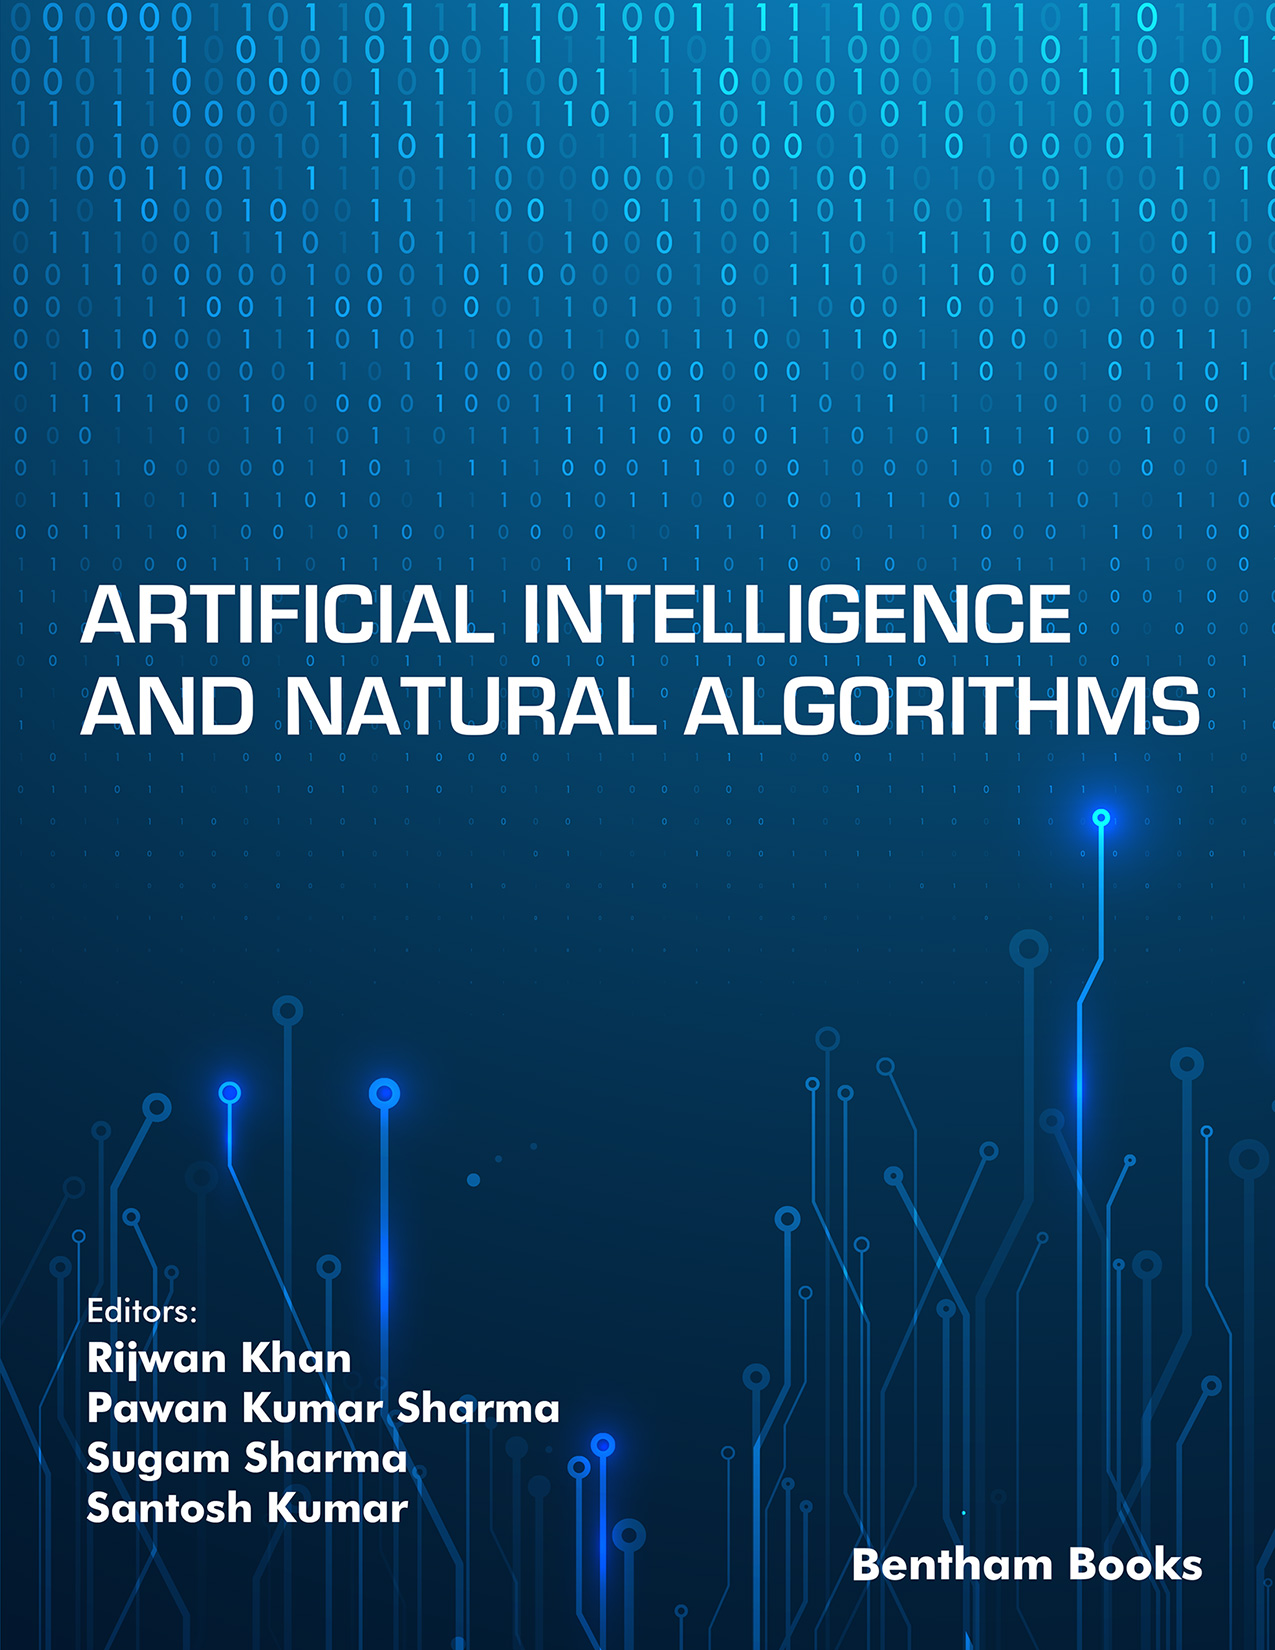 Artificial Intelligence and Natural Algorithms